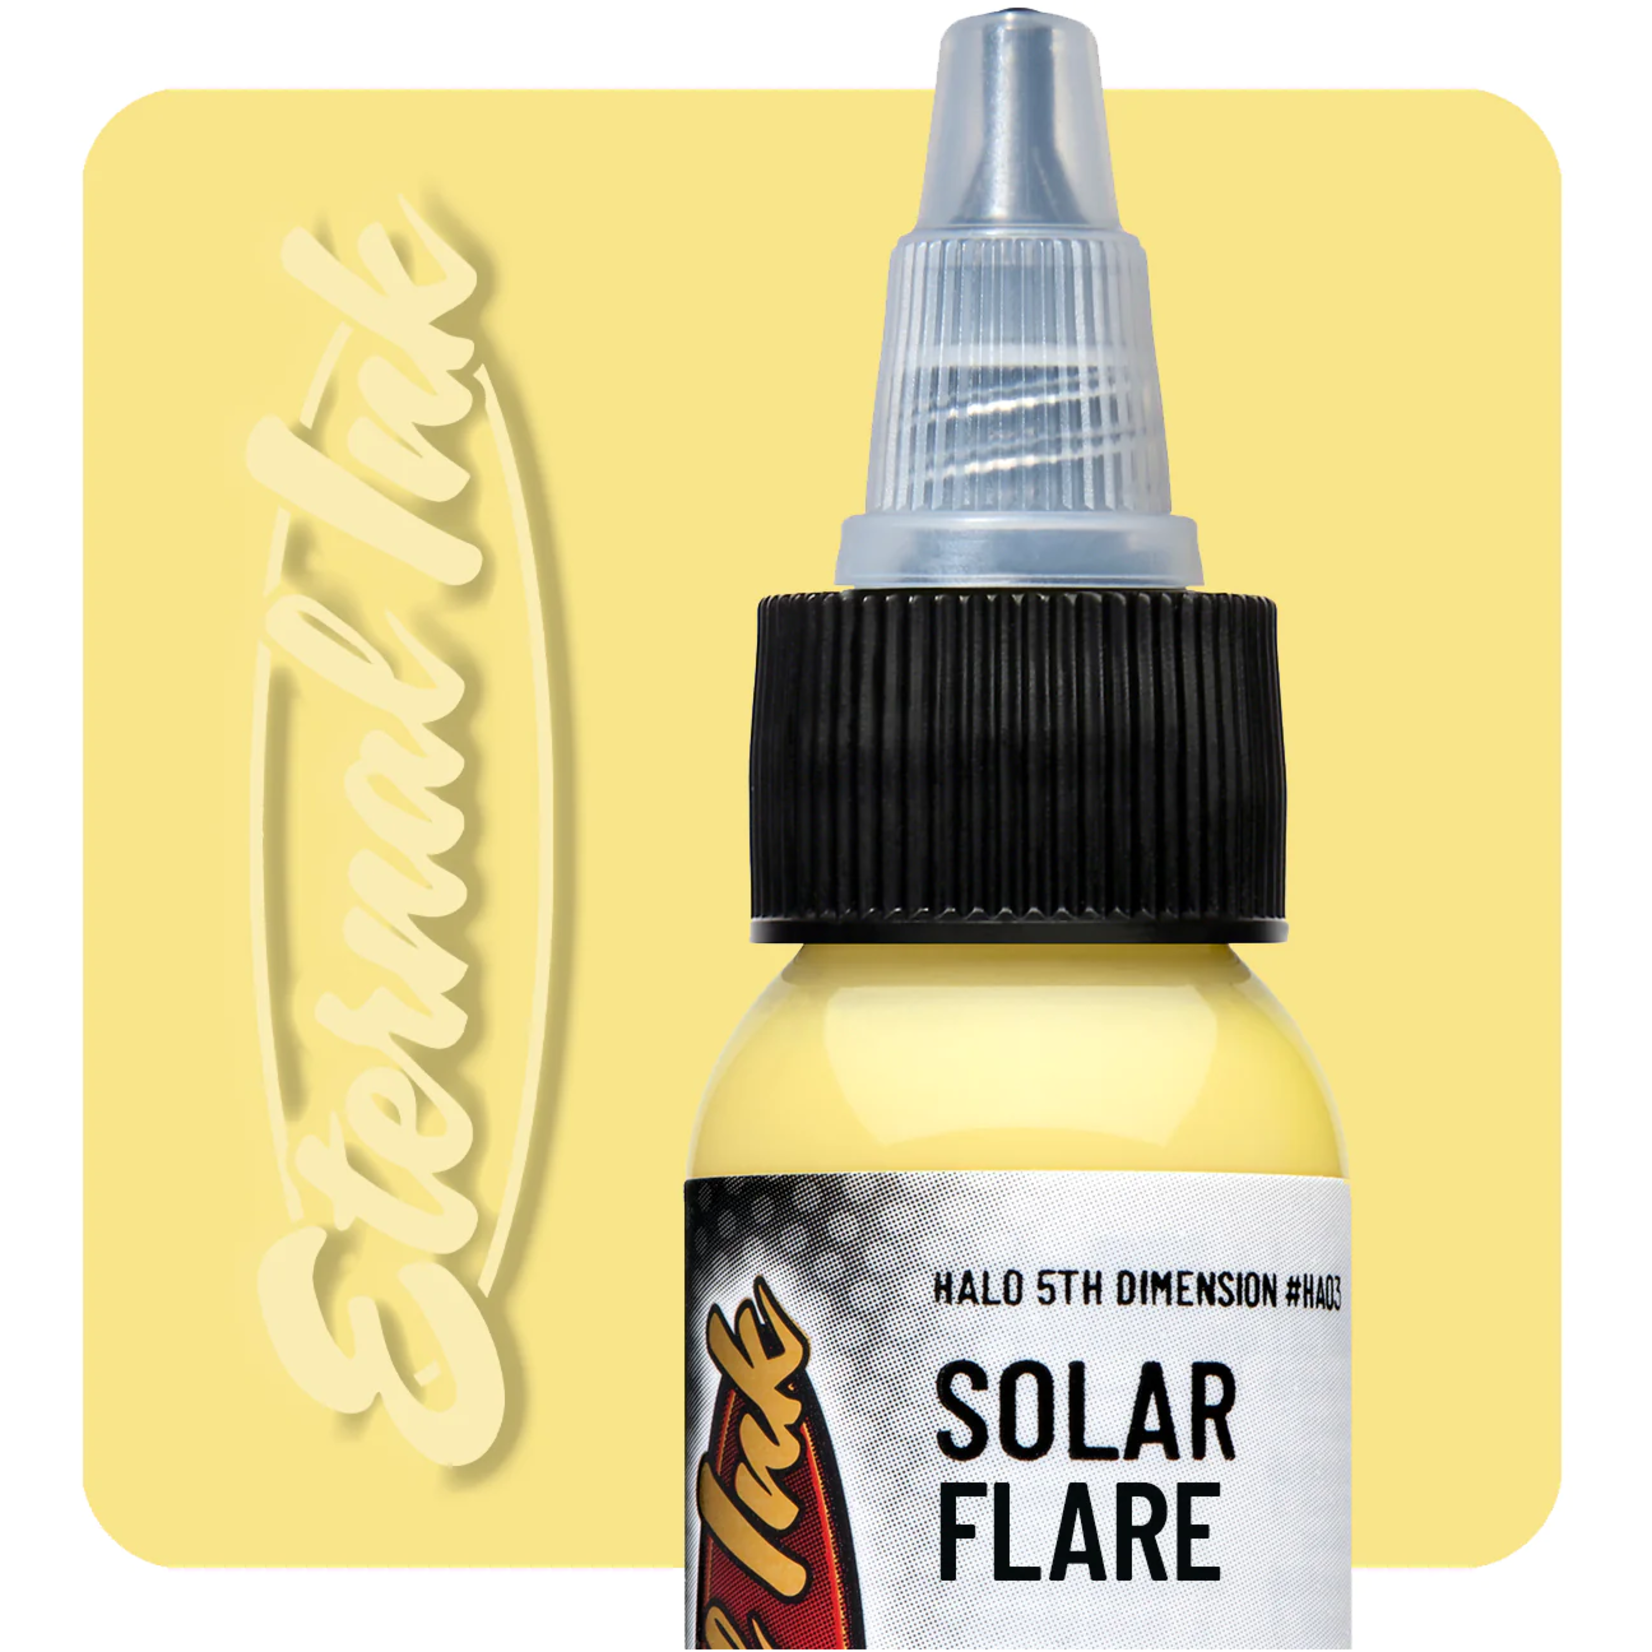 ETERNAL INK HALO FIFTH DIMENSION SIGNATURE SERIES SOLAR FLARE 1OZ